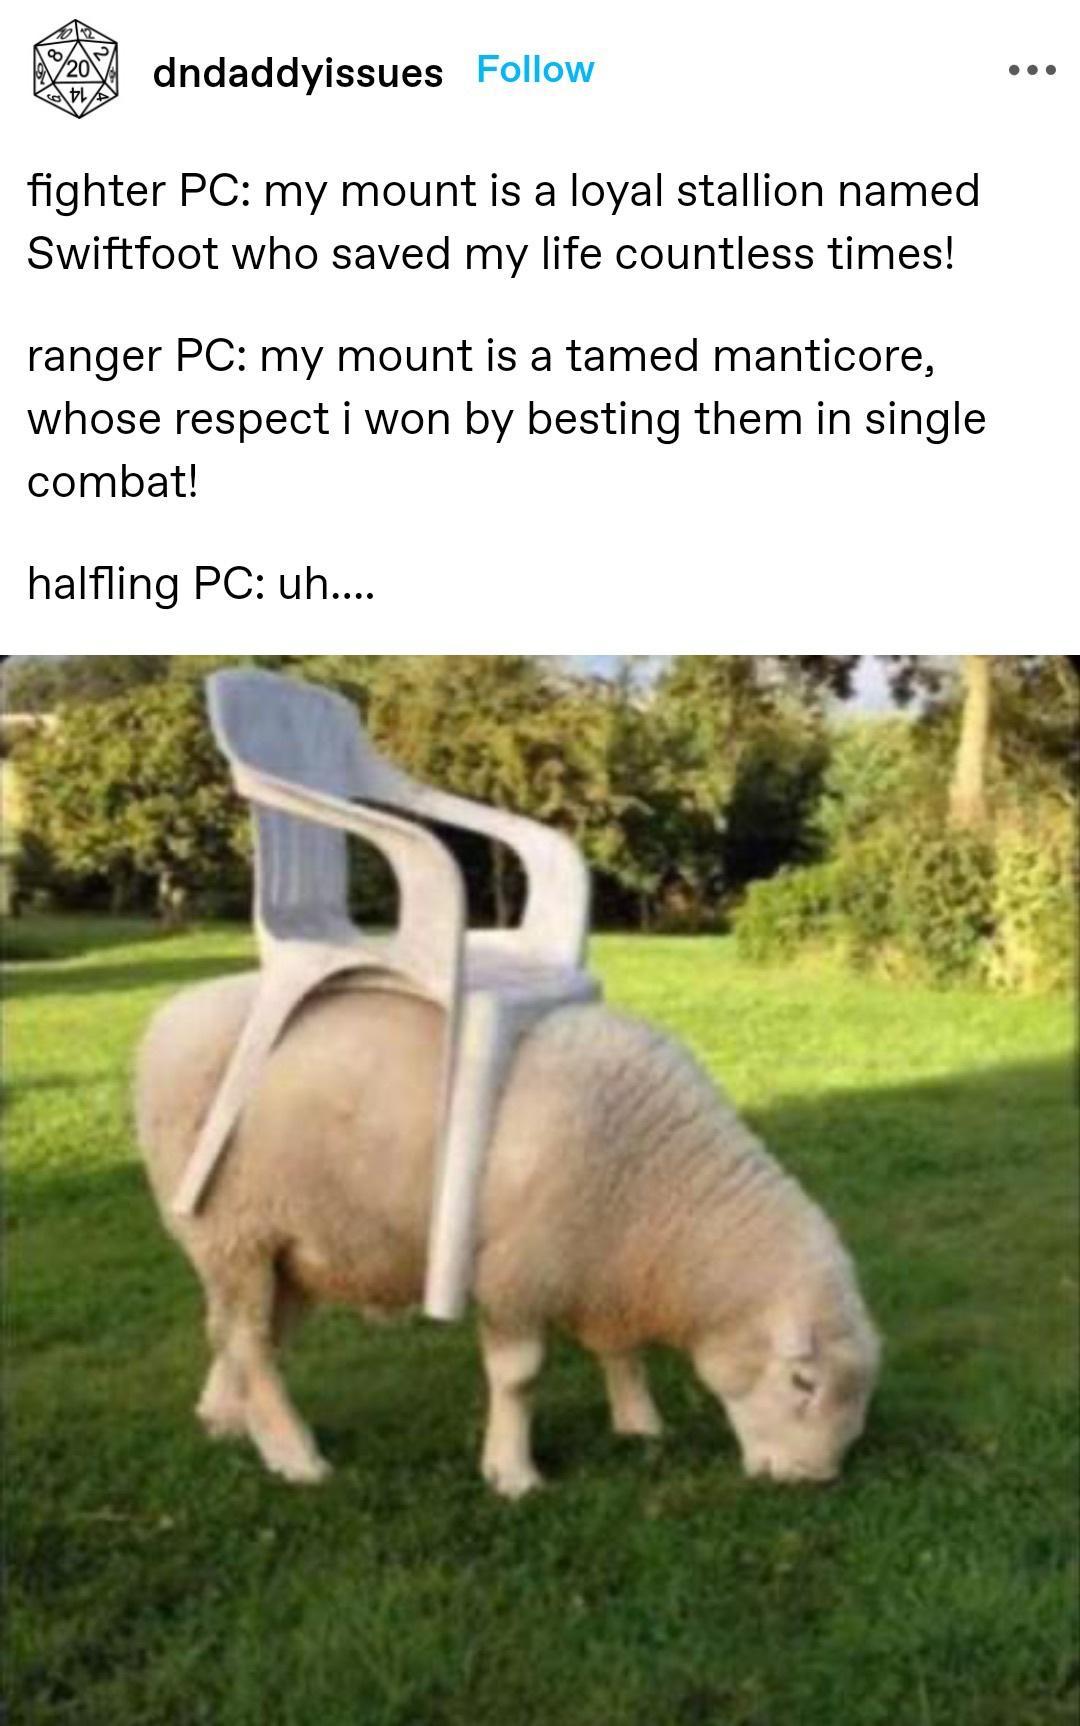 monday morning randomness - sheep lawn mower - ... dndaddyissues fighter Pc my mount is a loyal stallion named Swiftfoot who saved my life countless times! ranger Pc my mount is a tamed manticore, whose respect i won by besting them in single combat! half